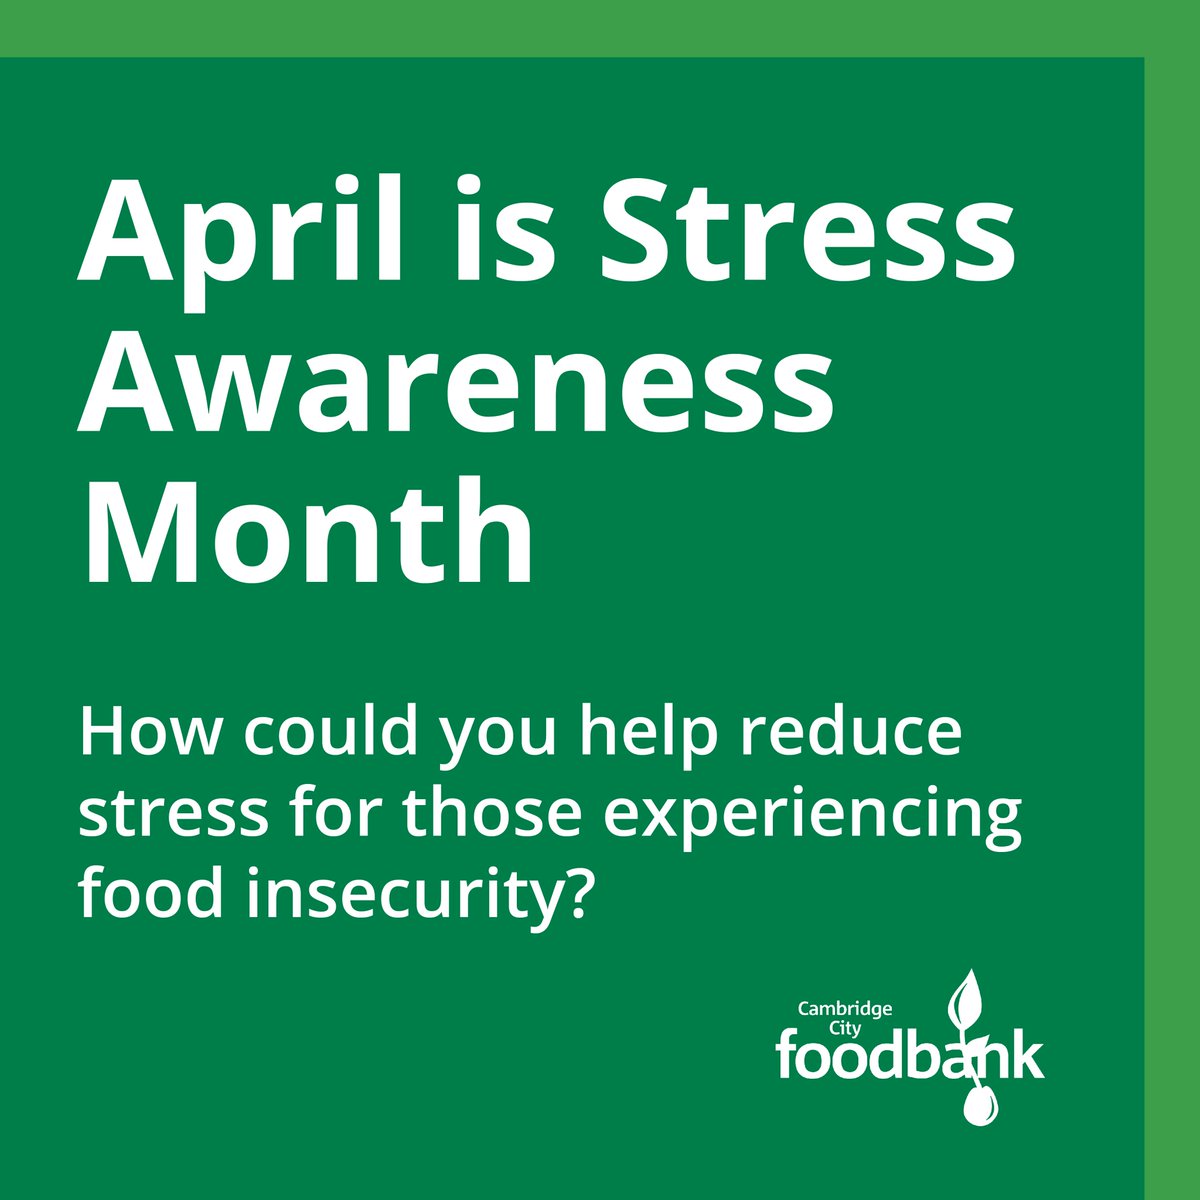 Your donations enable us to support our visitors through extremely stressful situations such as not being able to feed themselves. This #StressAwarenessMonth, we’re asking you to reflect on what you can do to help. For inspiration, visit: cambridgecity.foodbank.org.uk/give-help/